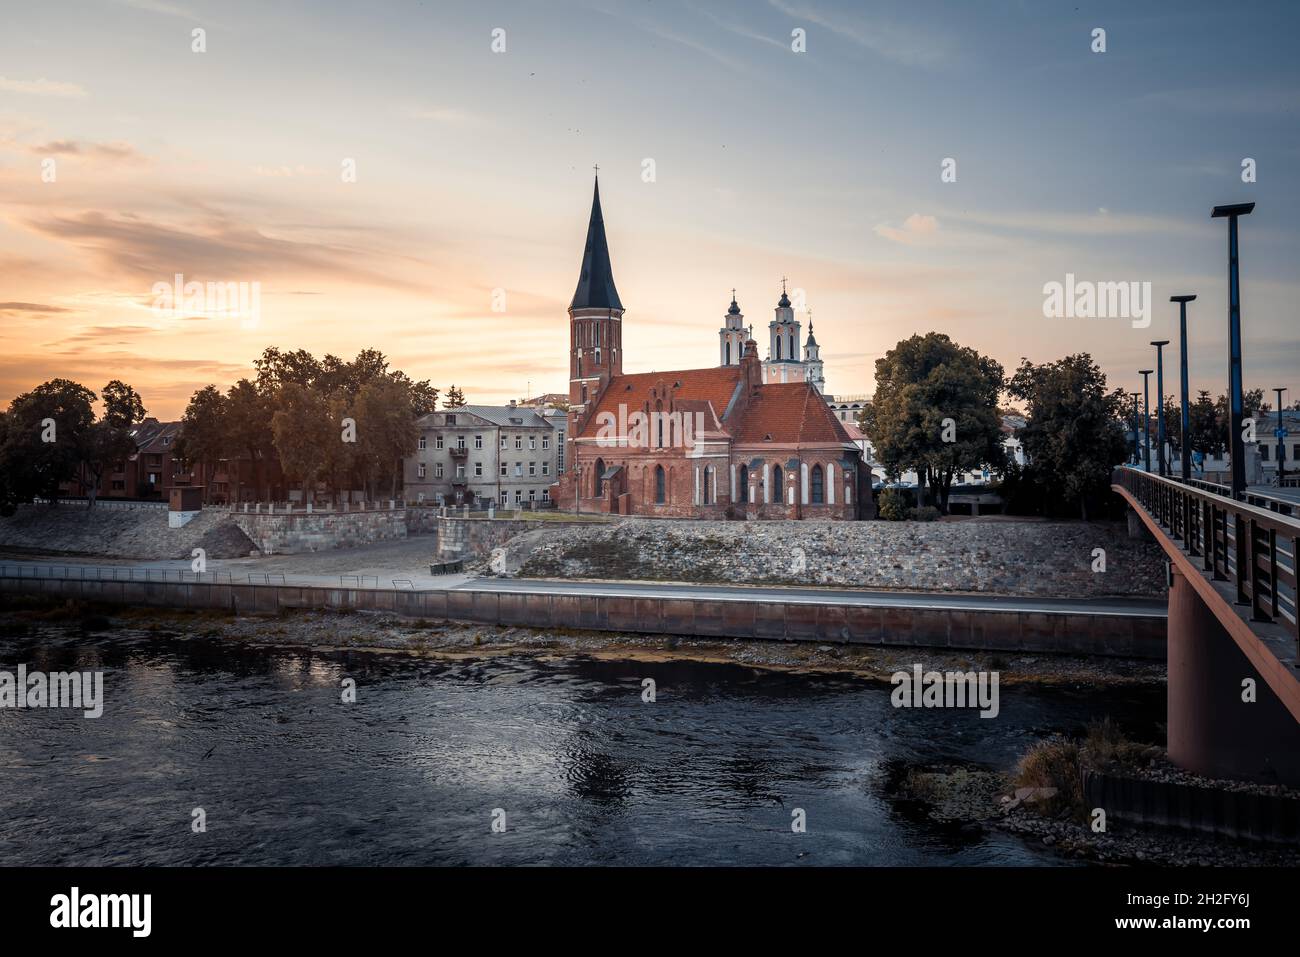 Church of Vytautas the Great and Neris River at sunset - Kaunas, Lithuania Stock Photo